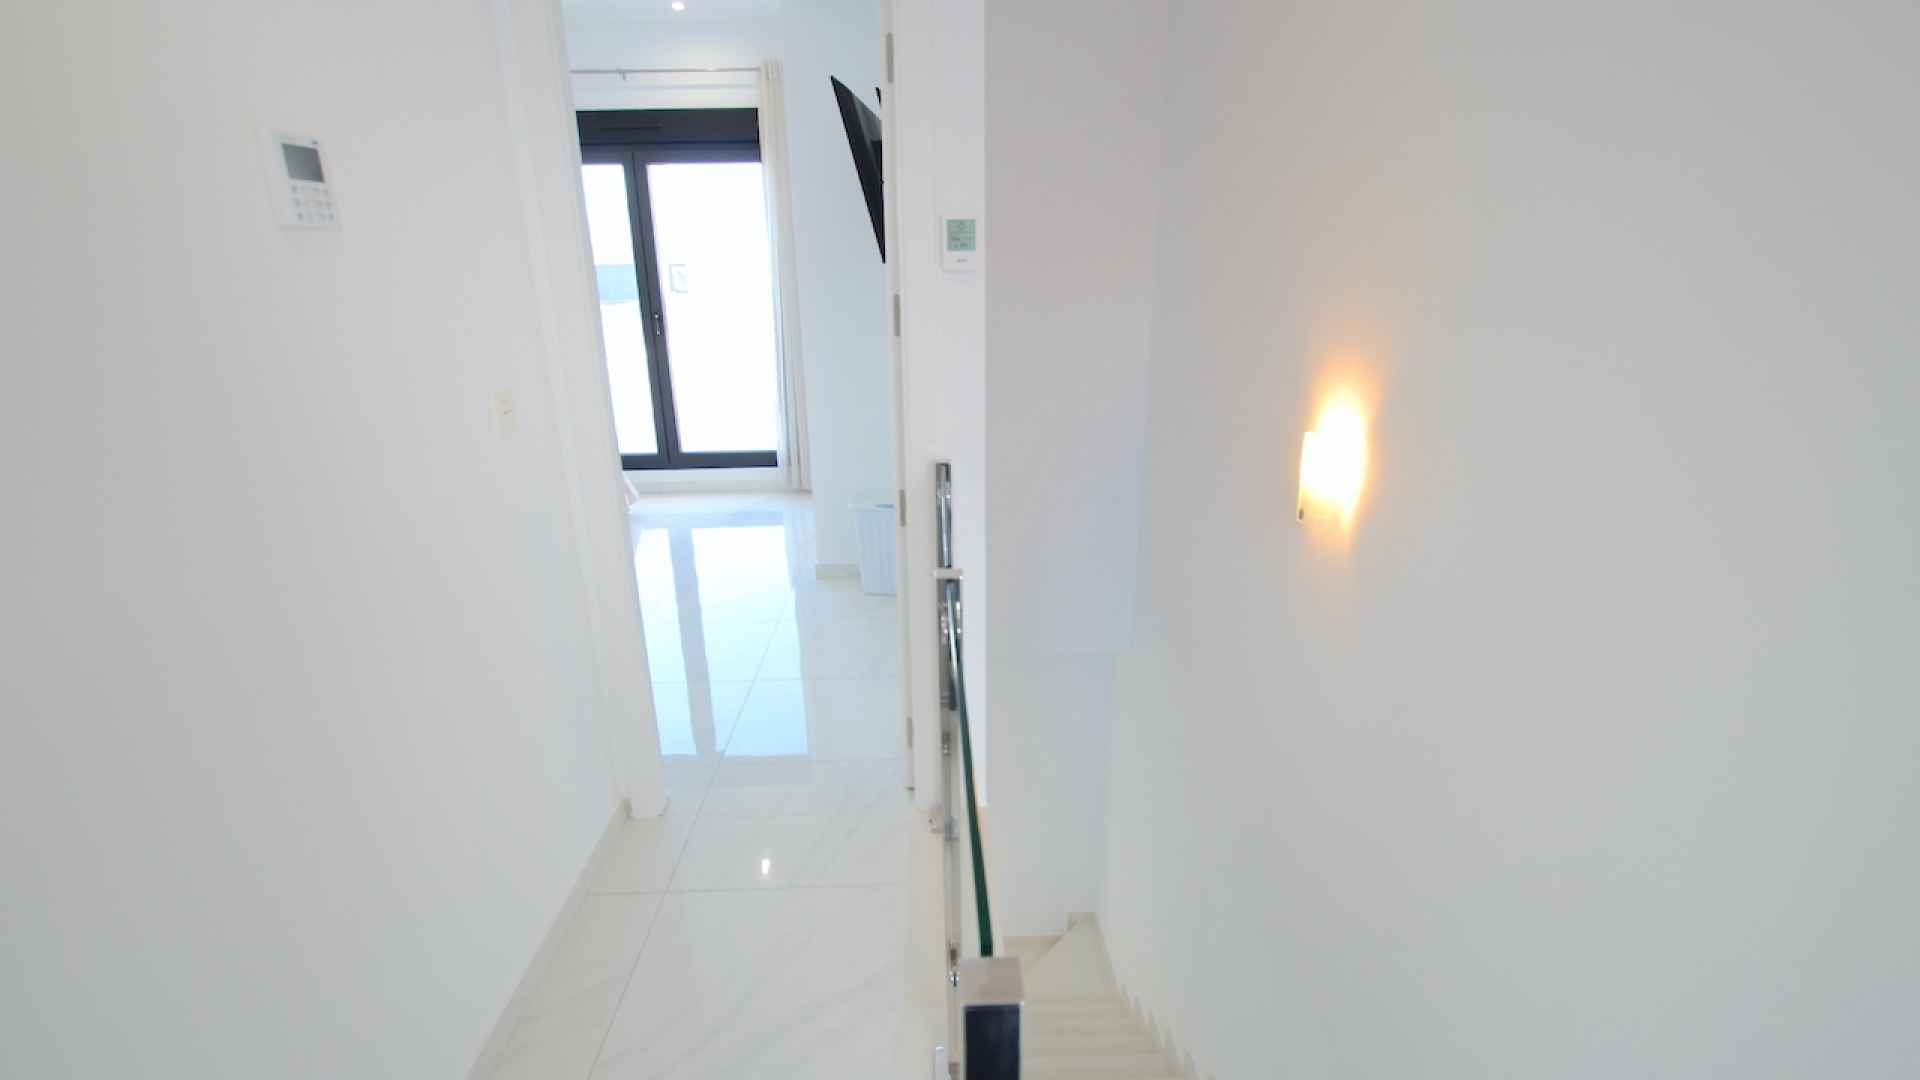 48308_stunning_3_bedroom_villa_in_a_highly_sough_after_location_201223102902_img_5085